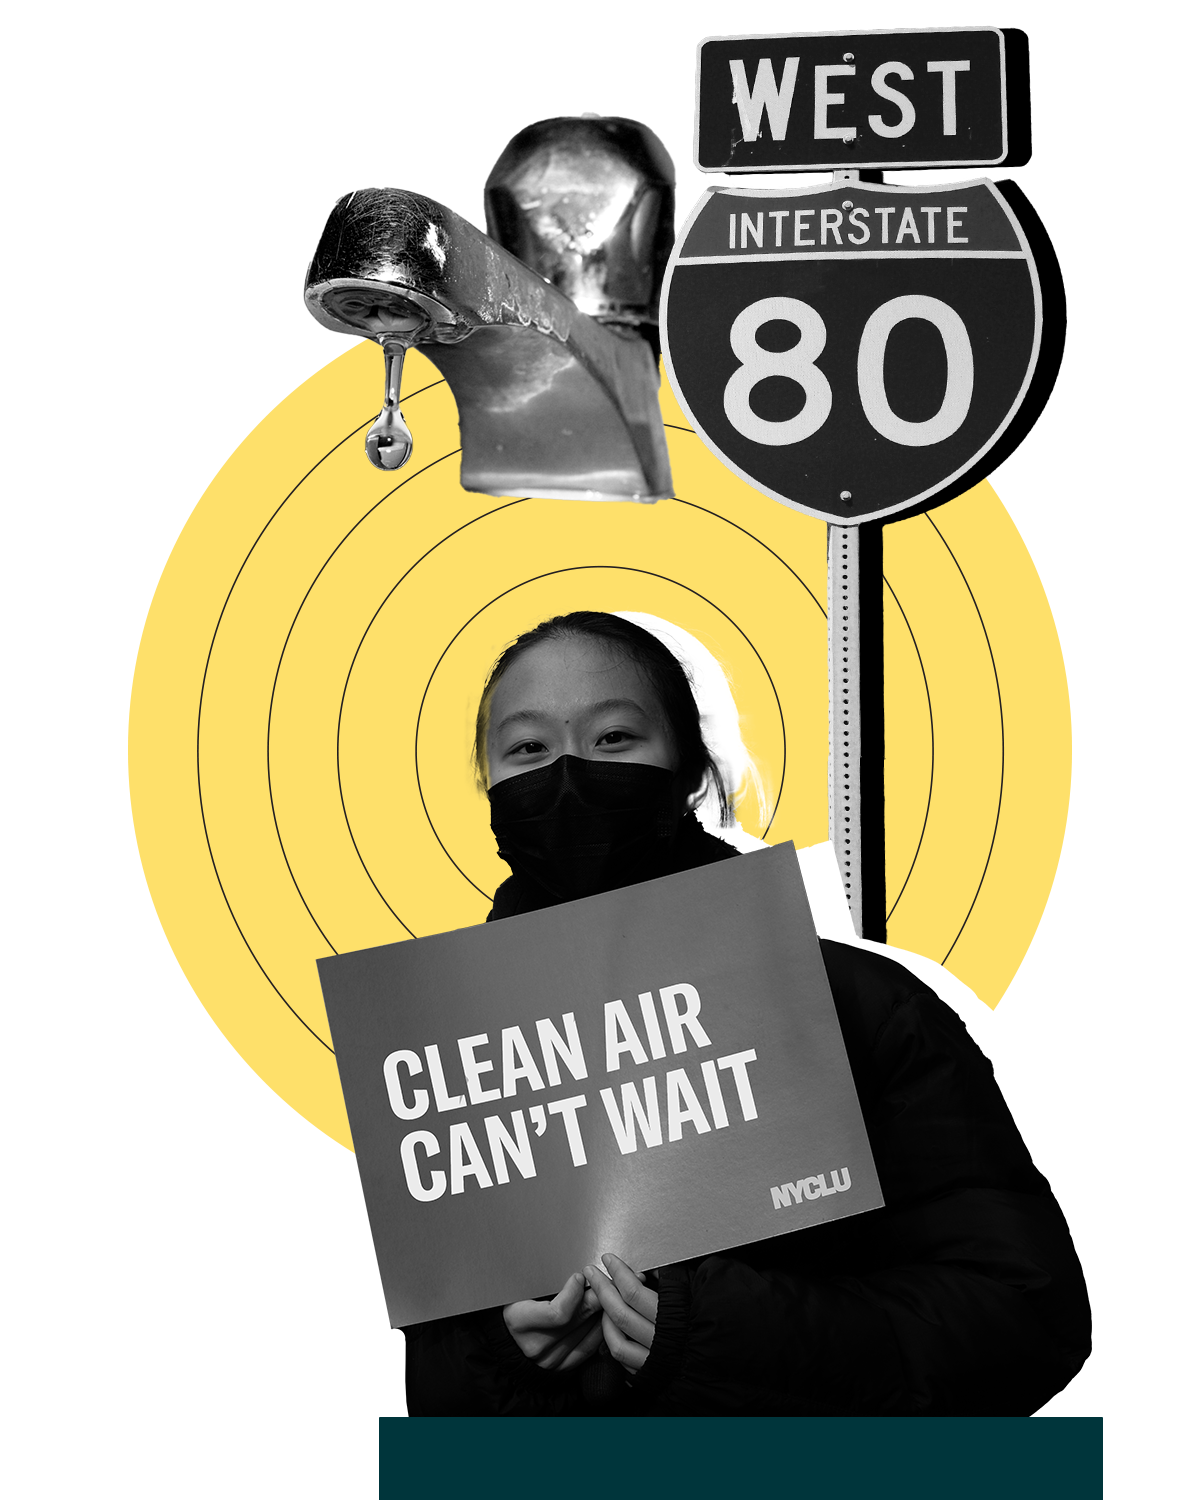 Environmental Justice Collage. Elements include: faucet, I-81 sign, and protestor holding a sign that reads, 